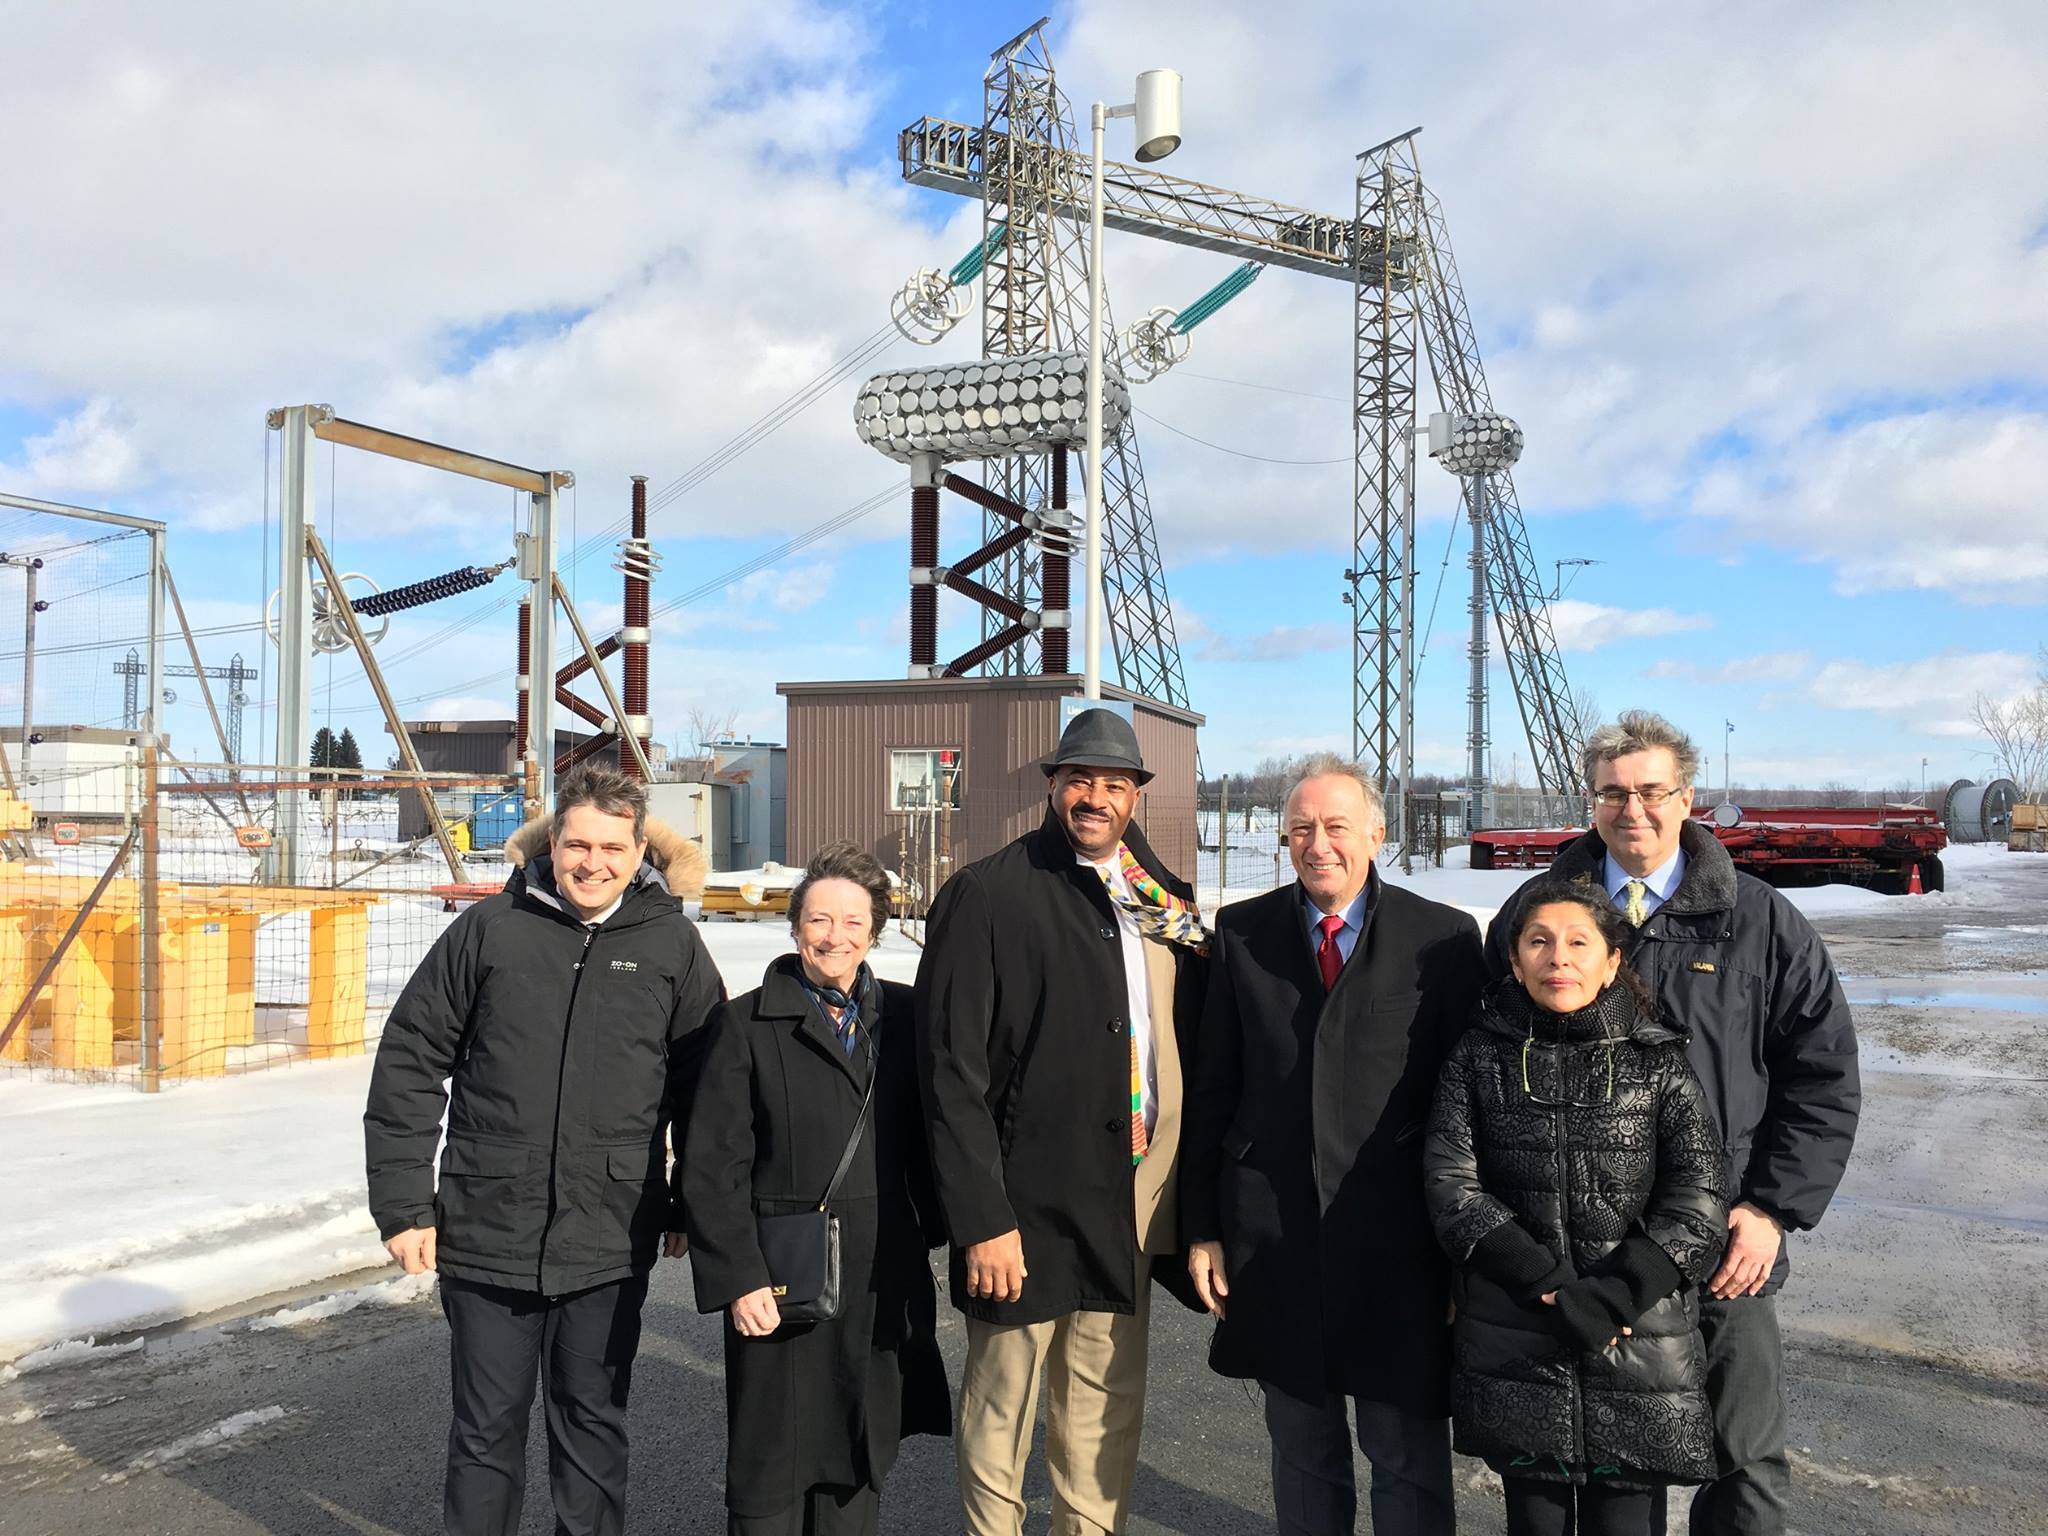 Jérôme Gosset, Director (far left) and Jean-Pierre Tardif, Communications and Marketing Advisor (far right) from Hydro Quebec’s Research Institute pose with committee members Senators Griffin, Meredith, Massicotte and Galvez in front of some of the facilities high-tech testing equipment on February 8th, 2017 in Varennes.